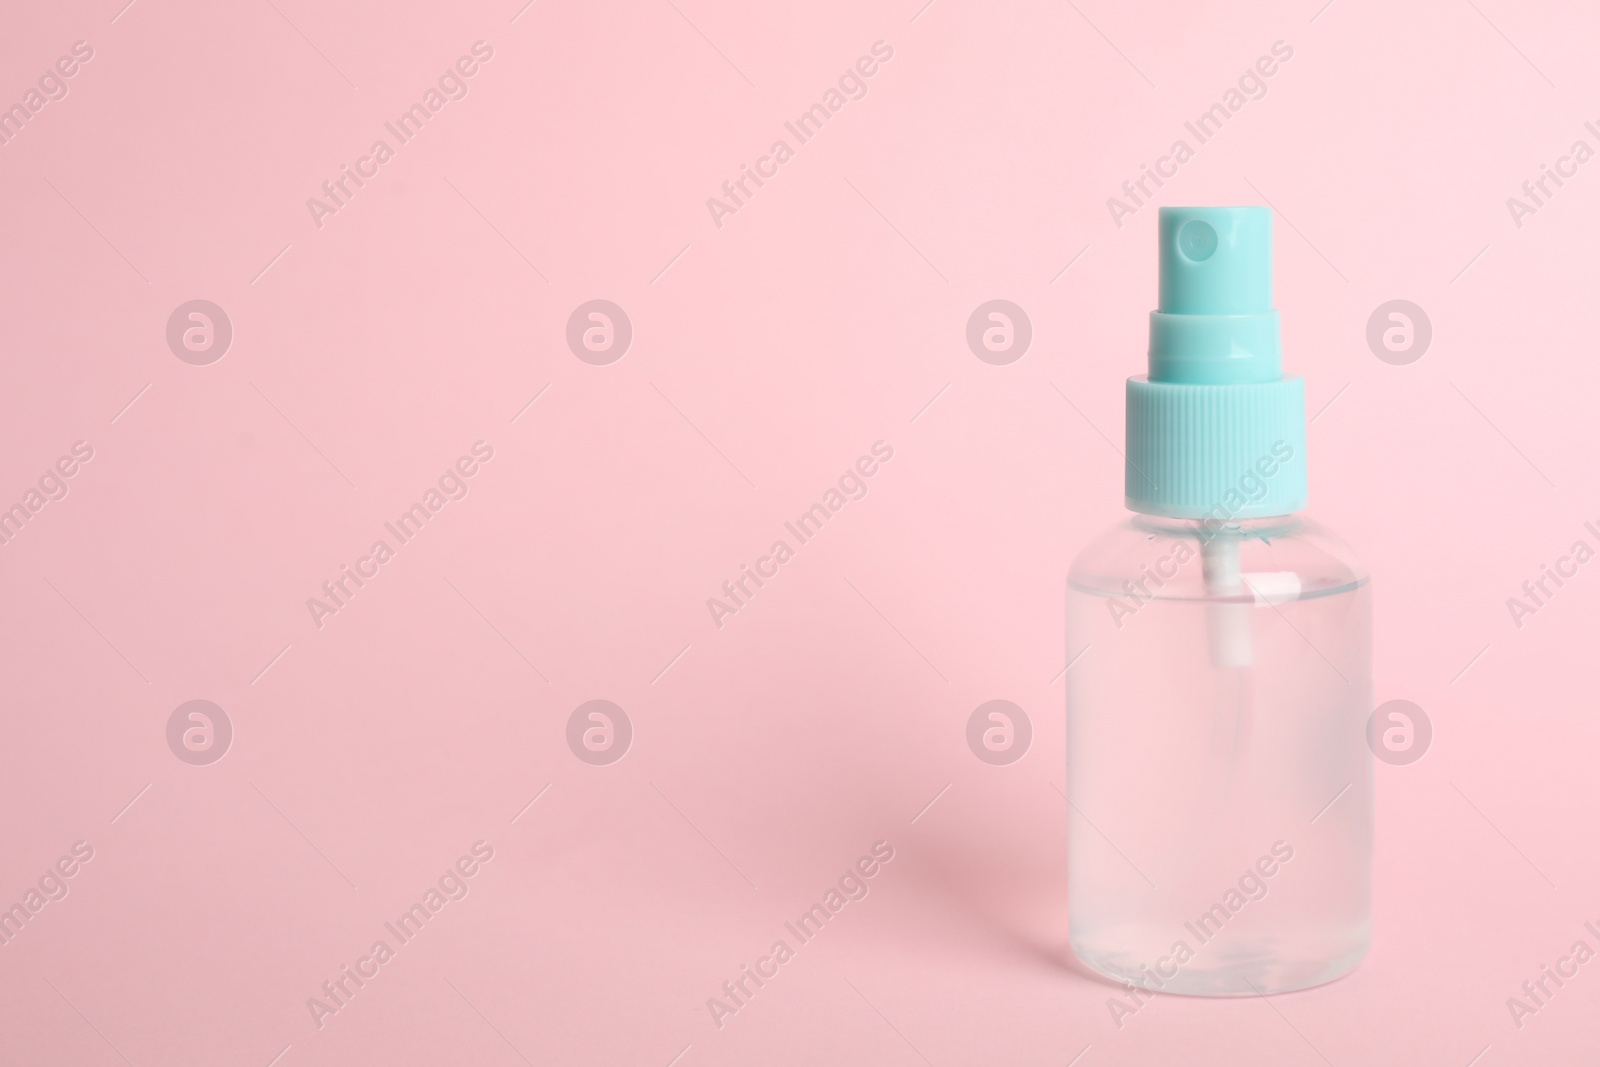 Photo of Antiseptic spray on pink background. Space for text